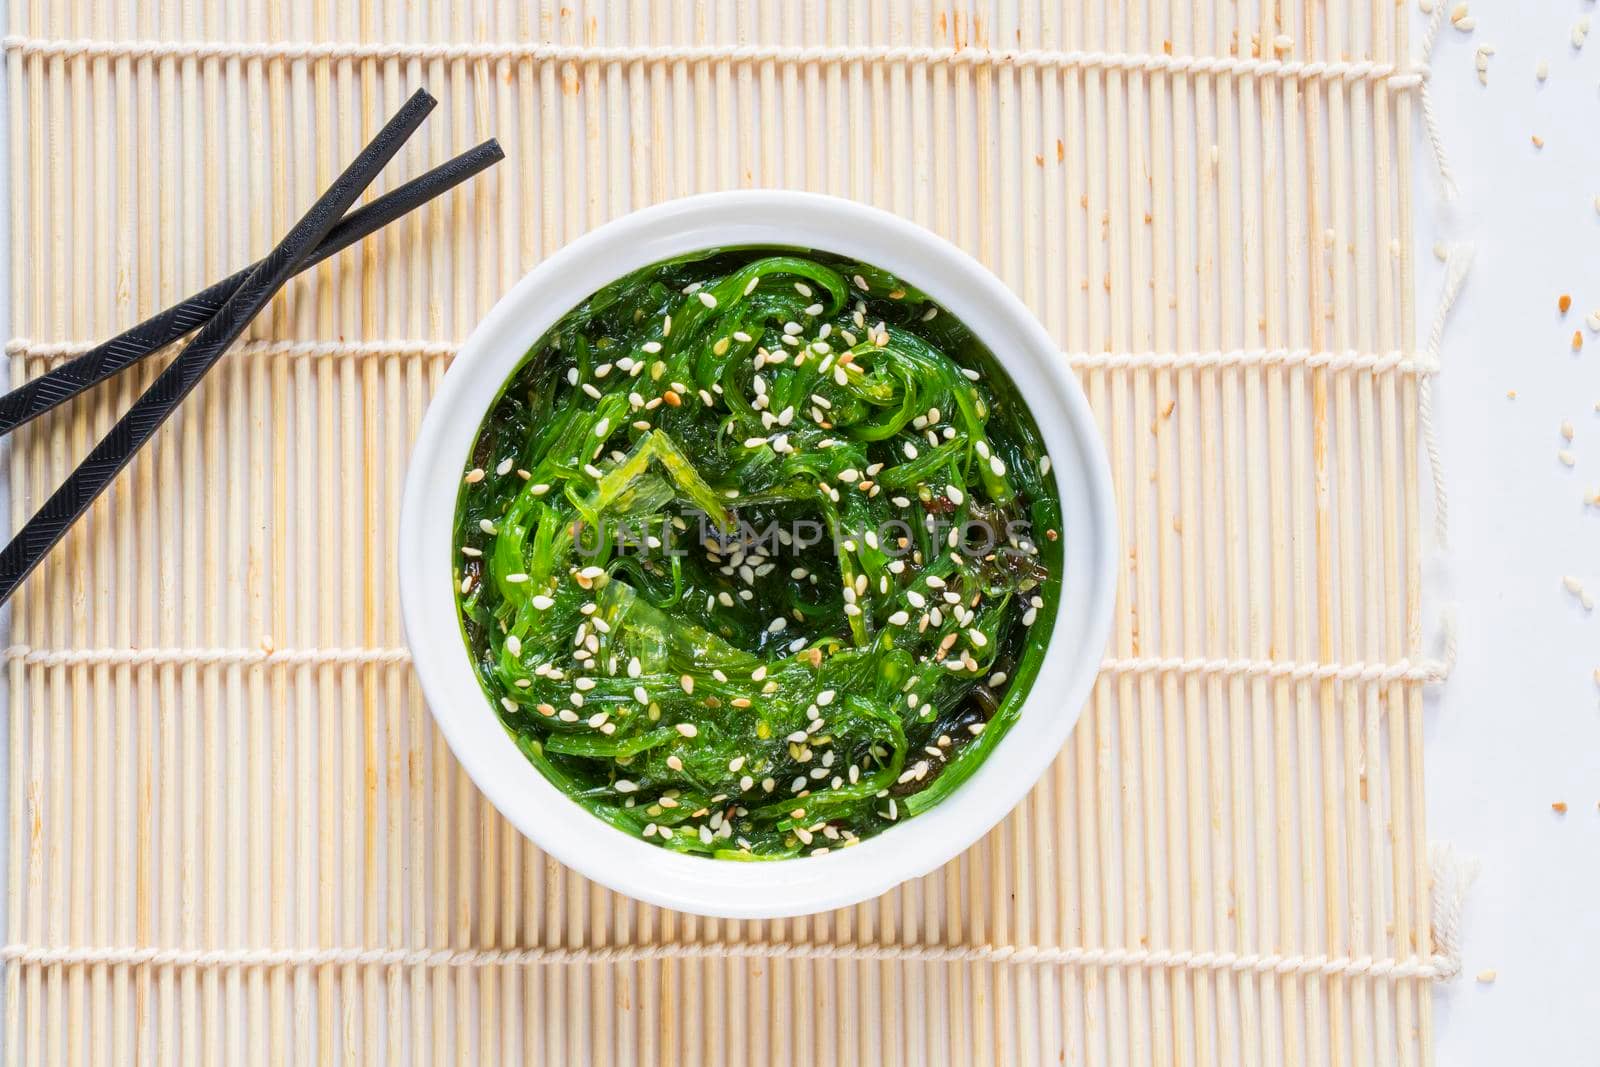 Wakame in the white bowl and chopsticks